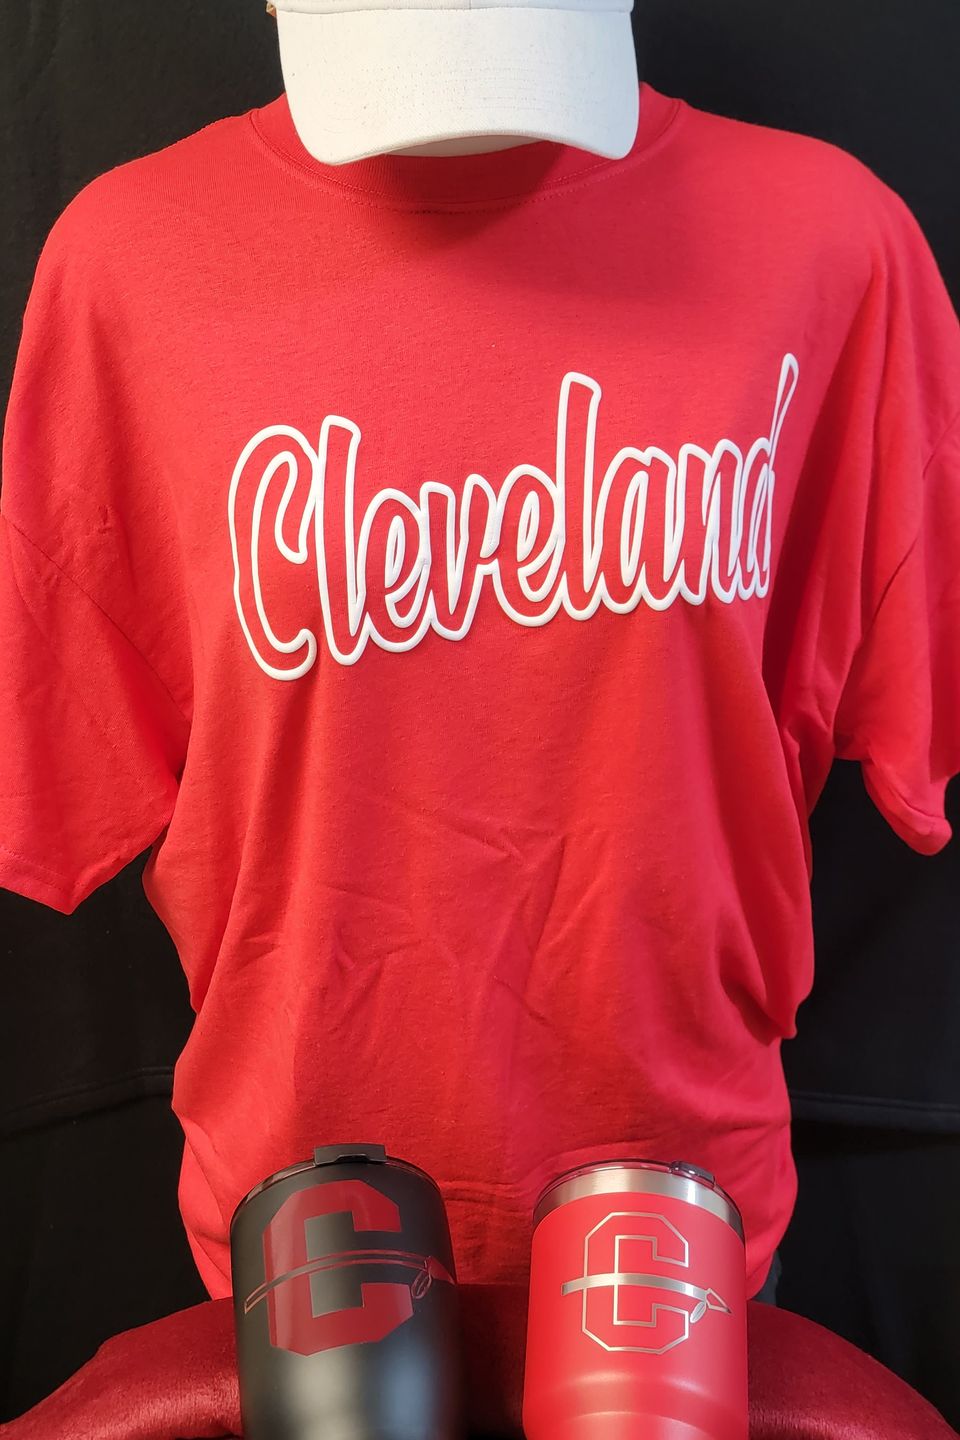 Cleveland Independent School District logo on tumblers, t-shirt, and white cap. Presented by SaRi's Creations.